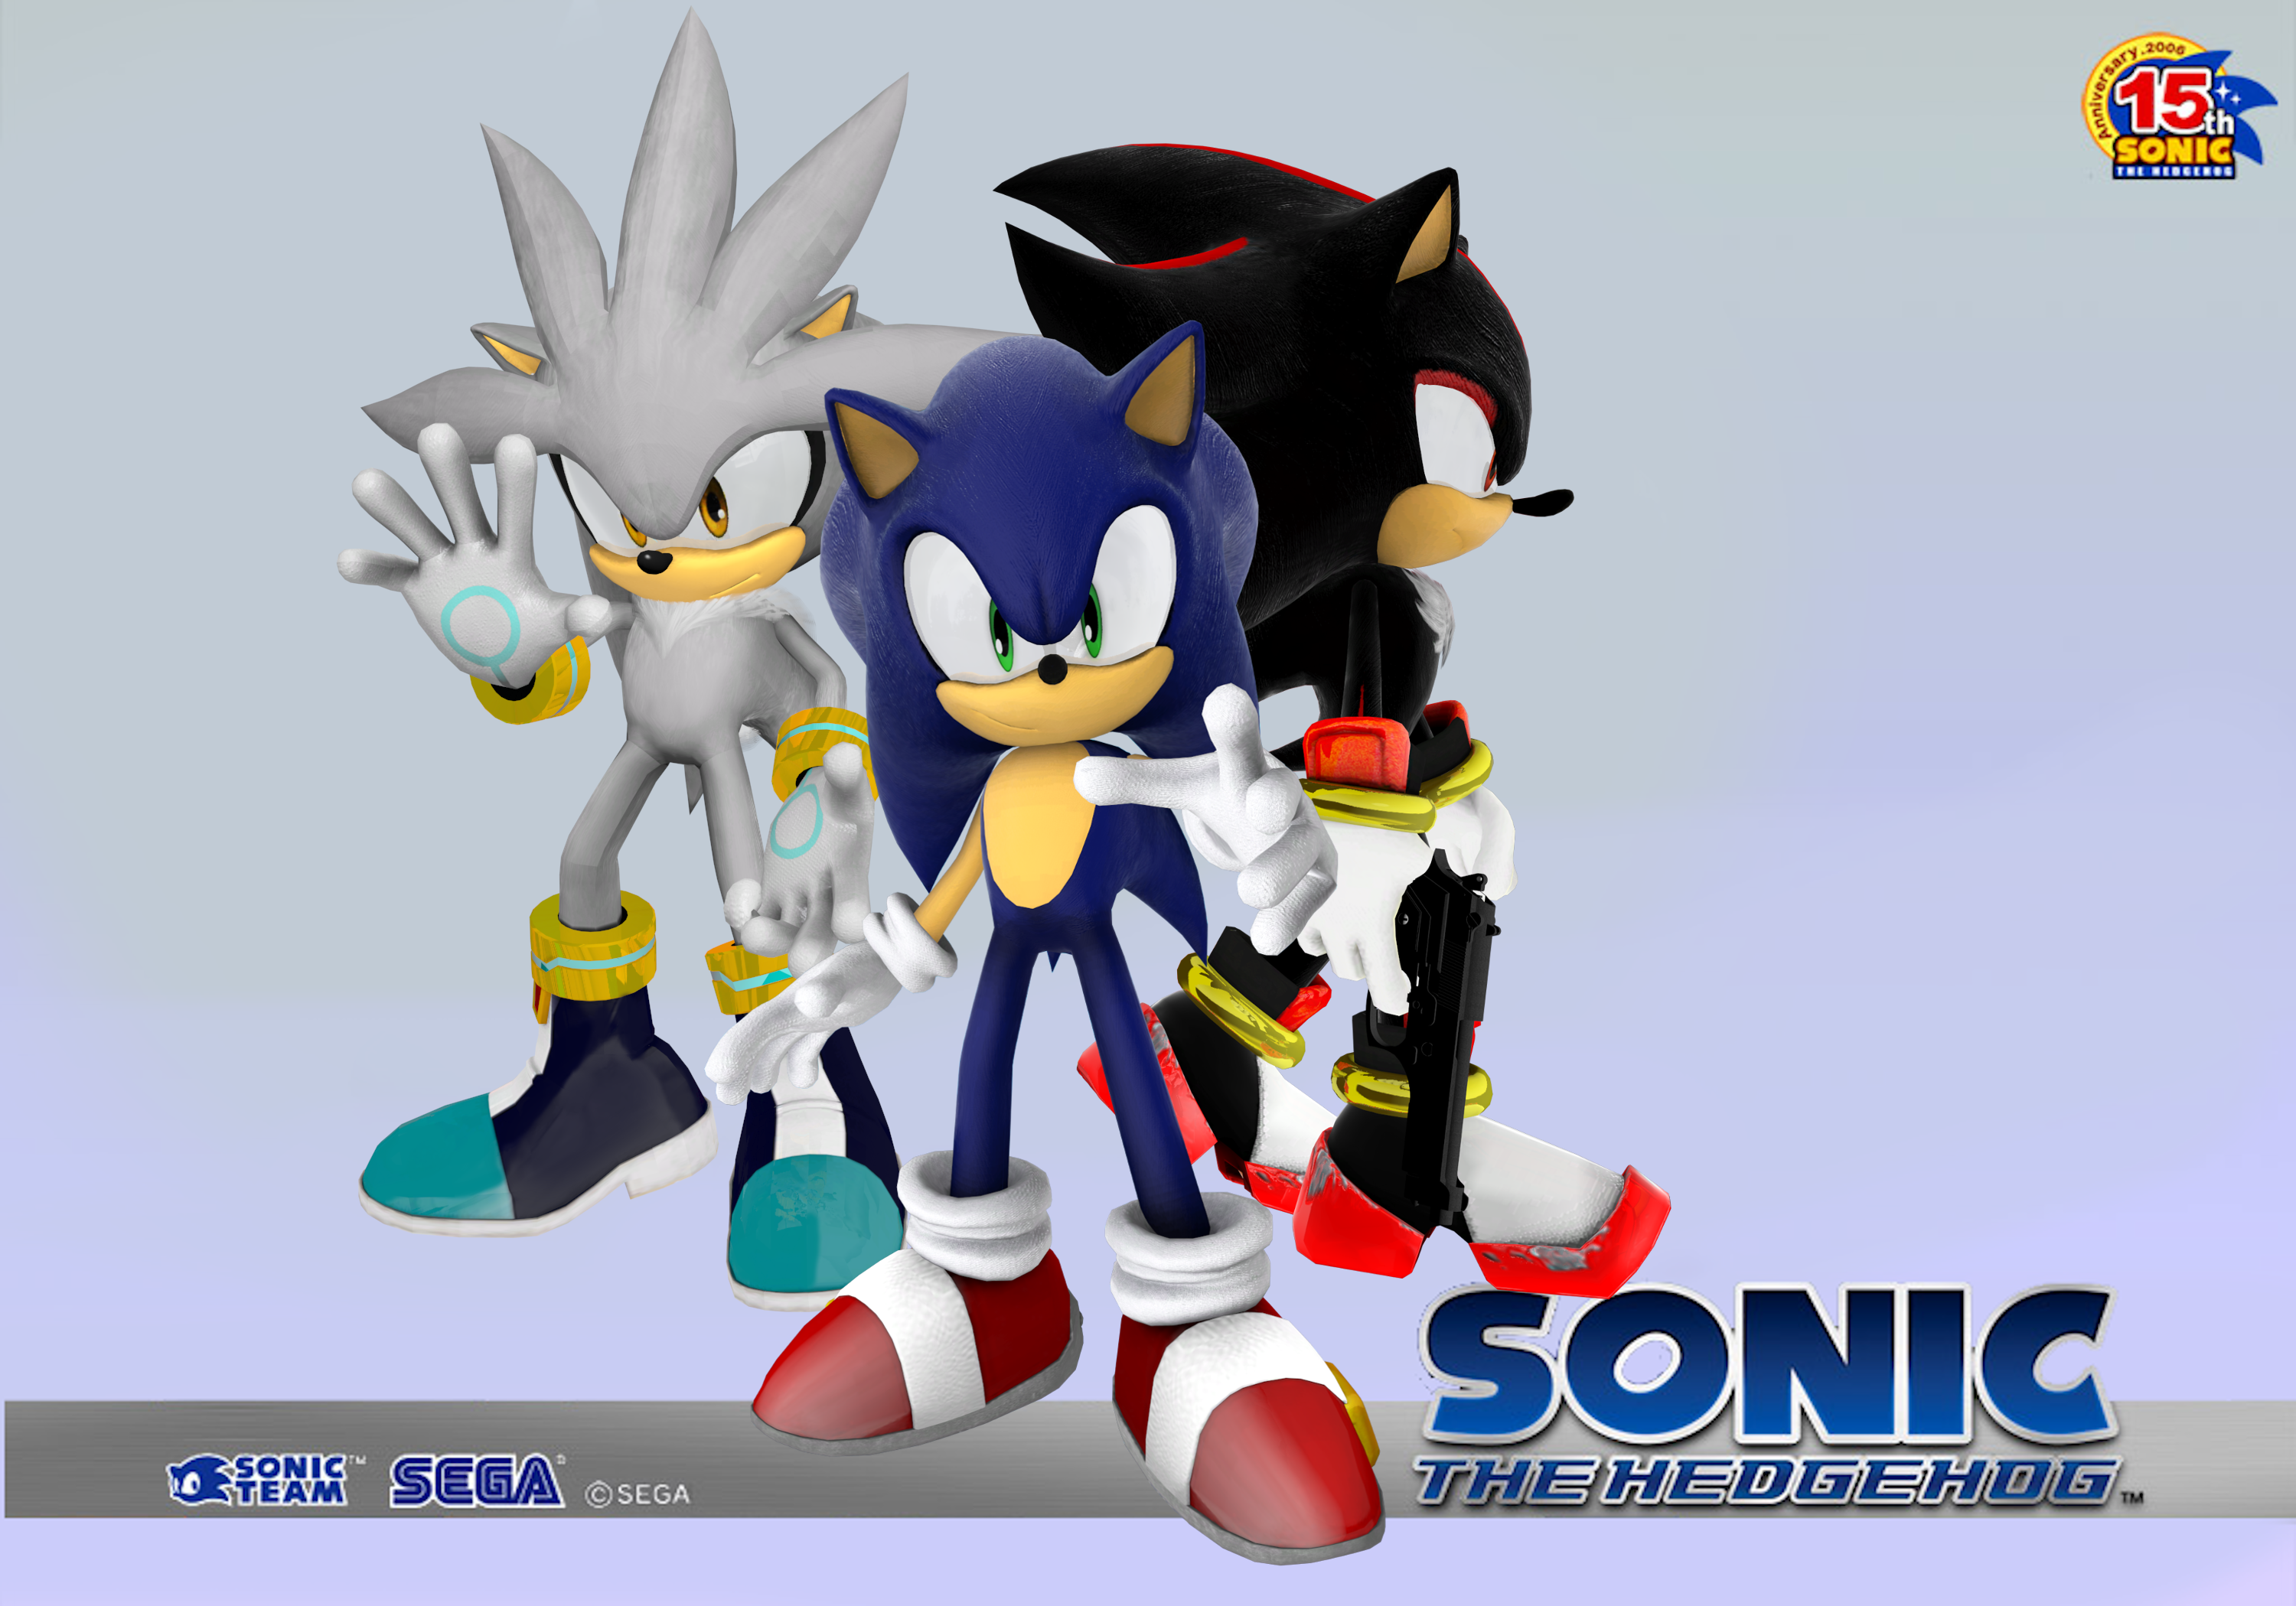 Sonic Next Wallpaper sonic shadow and silver 32583620 3000 2099png 3000x2099